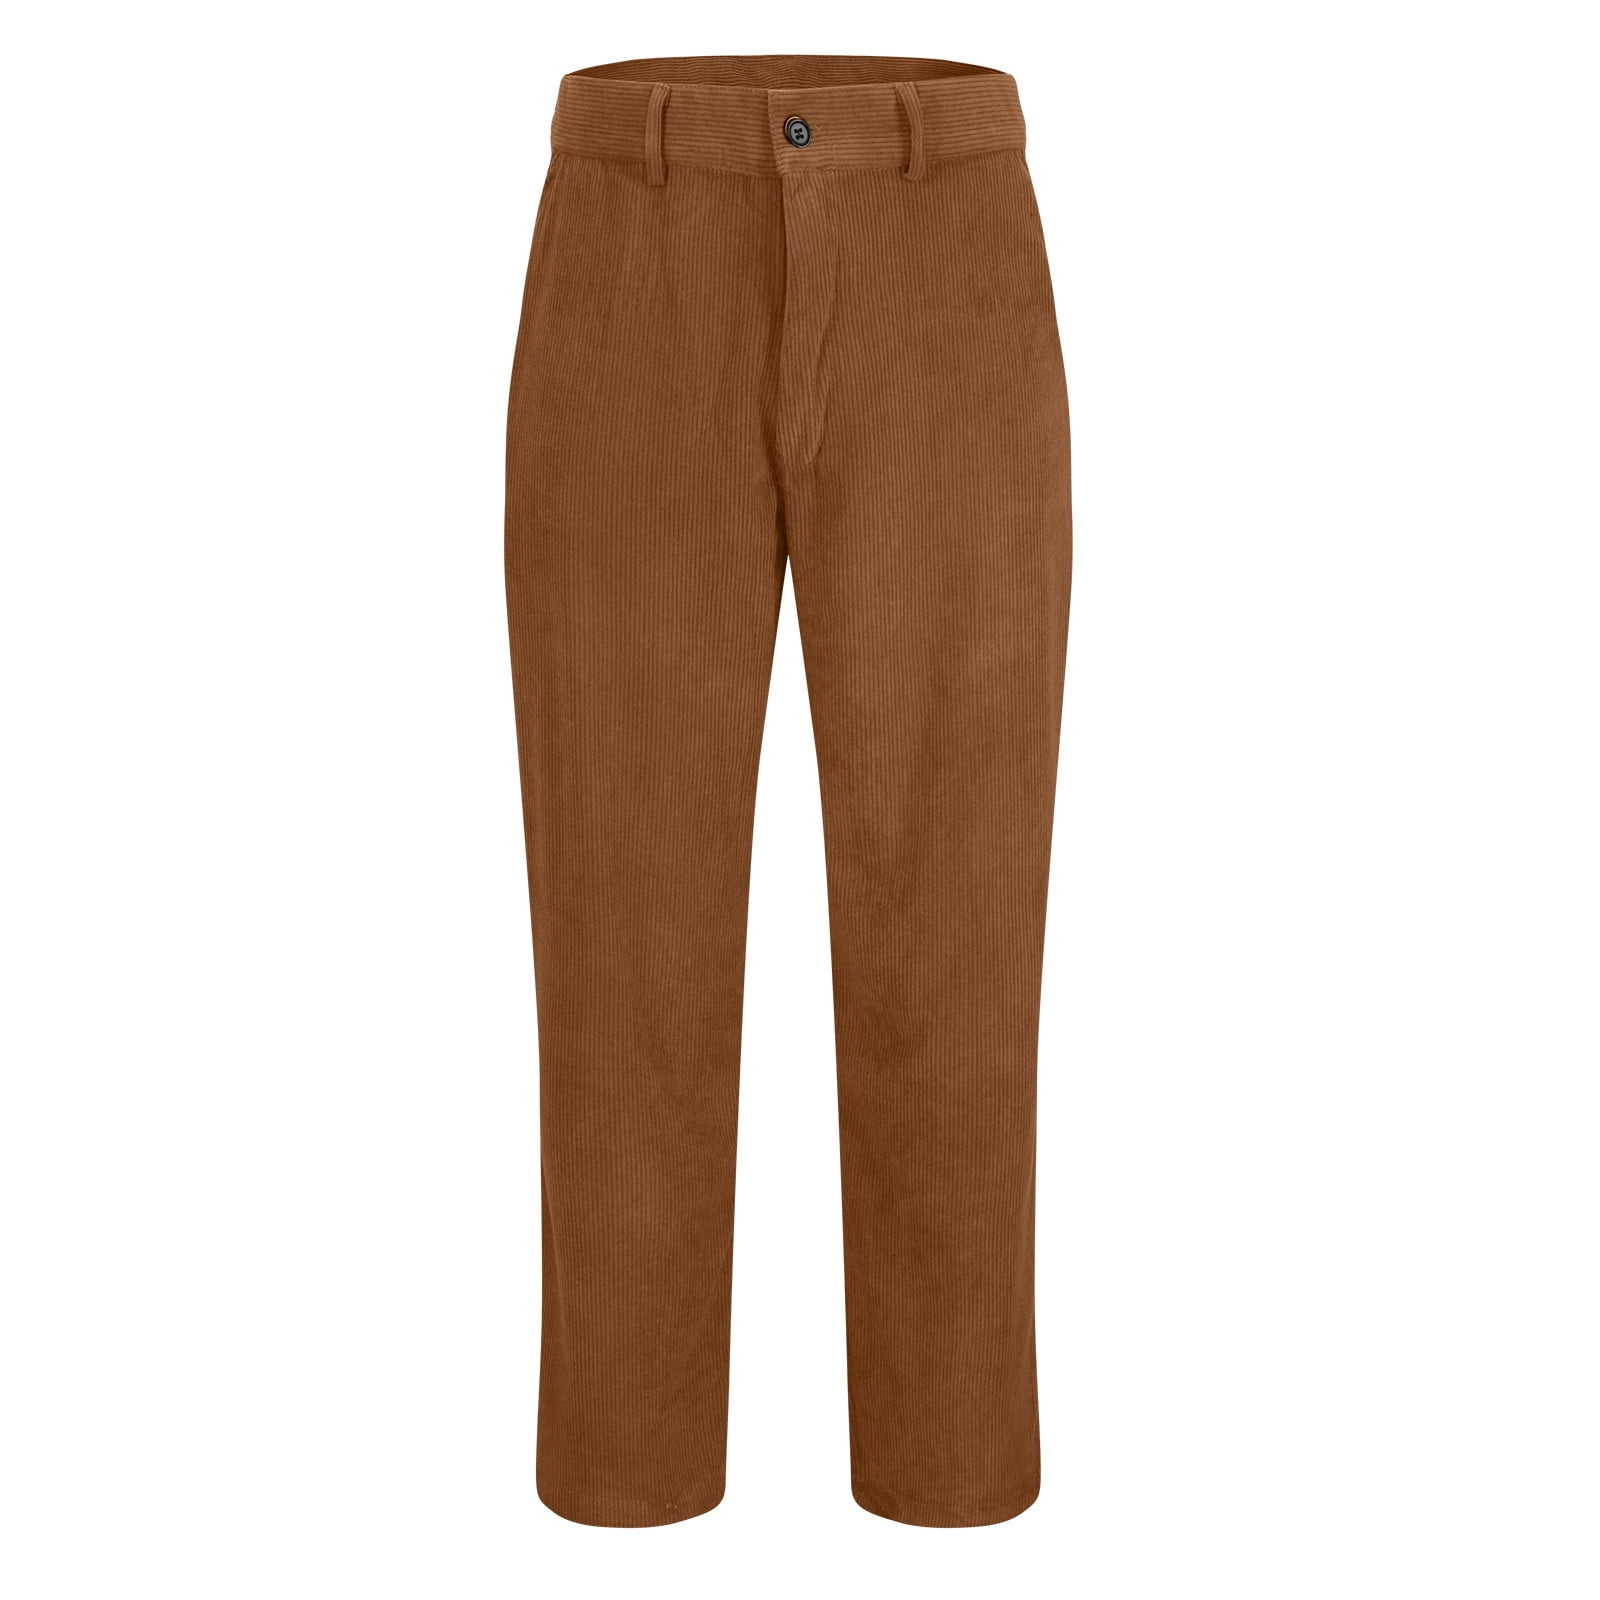 Alimens & Gentle Men's Corduroy Straight Fit Flat Front Casual Pant-Brown  02, 28W x 30L at  Men's Clothing store